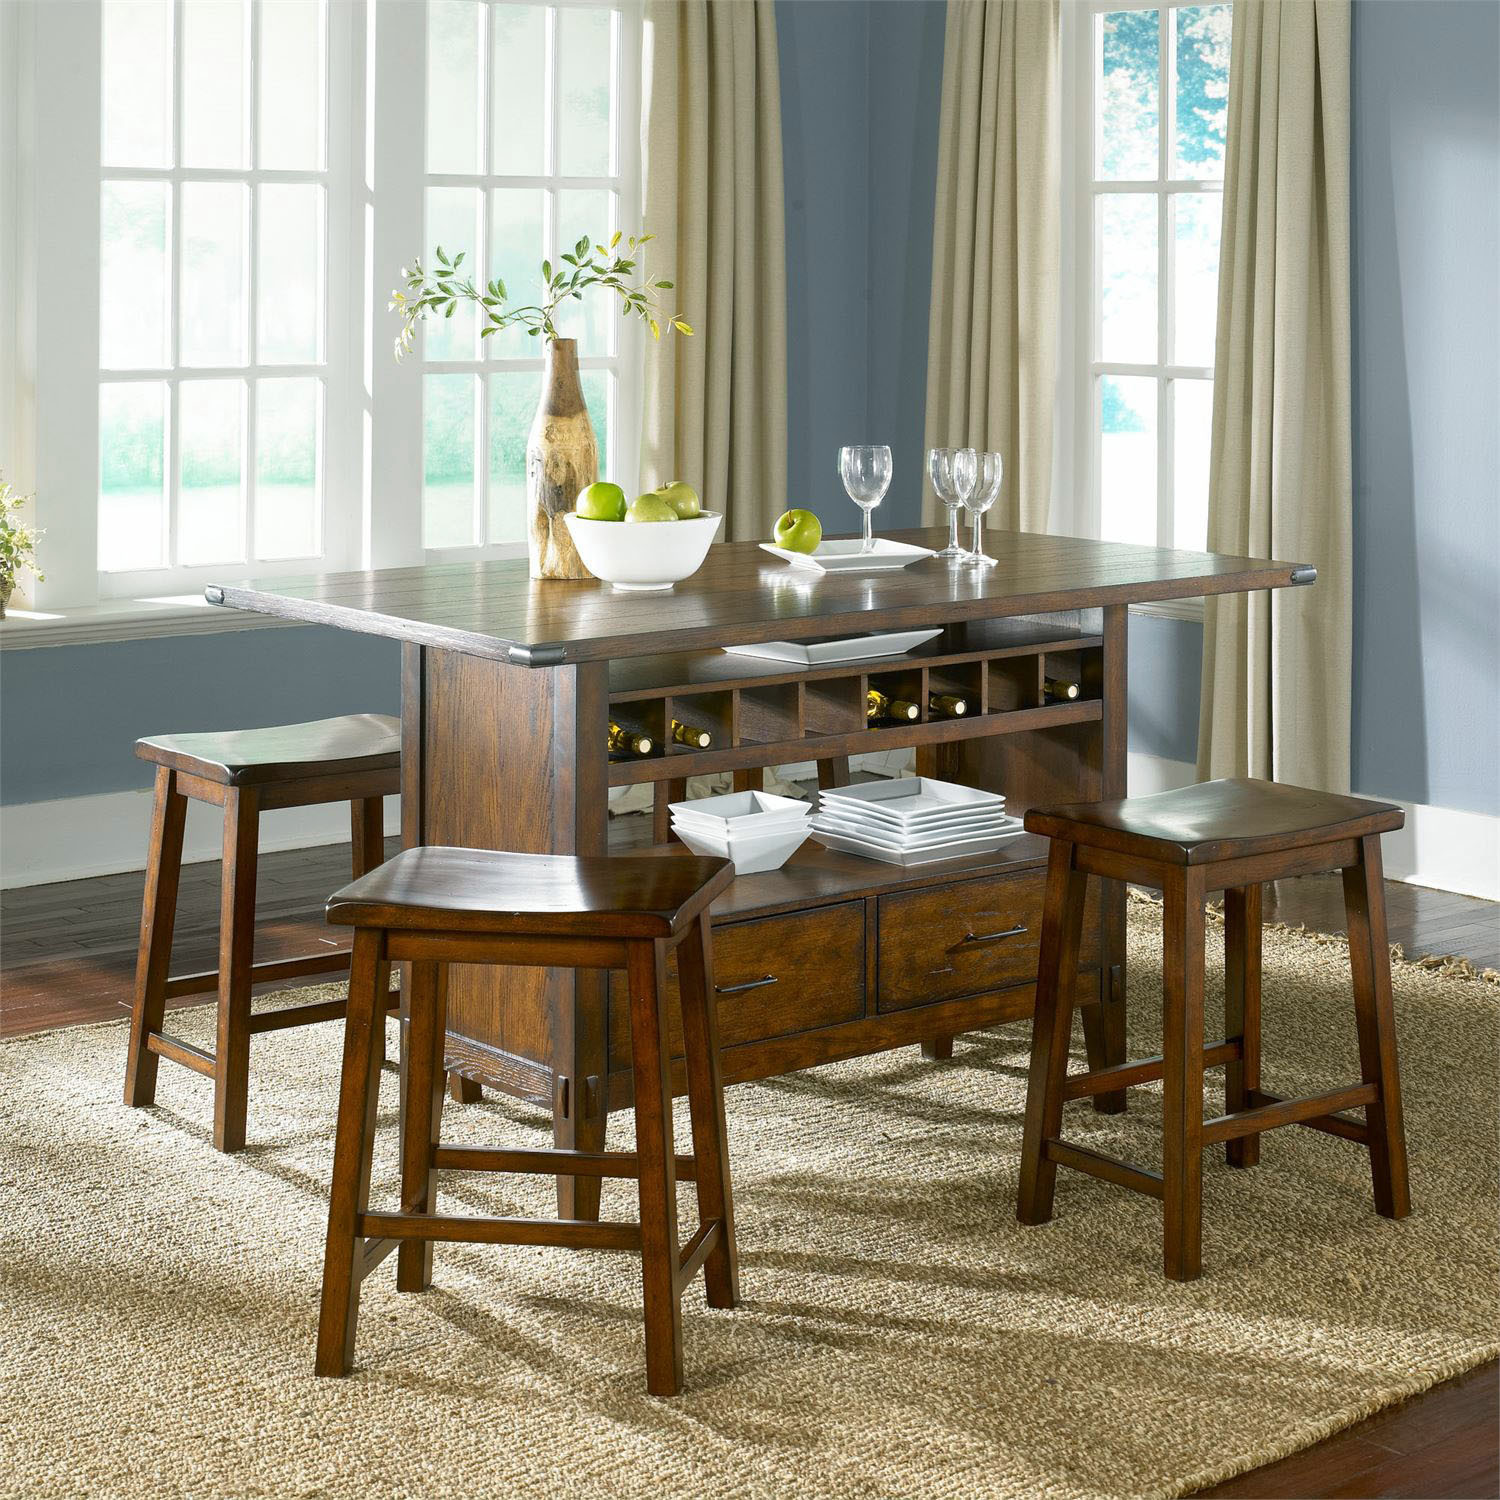 Kitchen Tables With Storage
 Oak Planked Counter Height Dining Table with Wine Storage